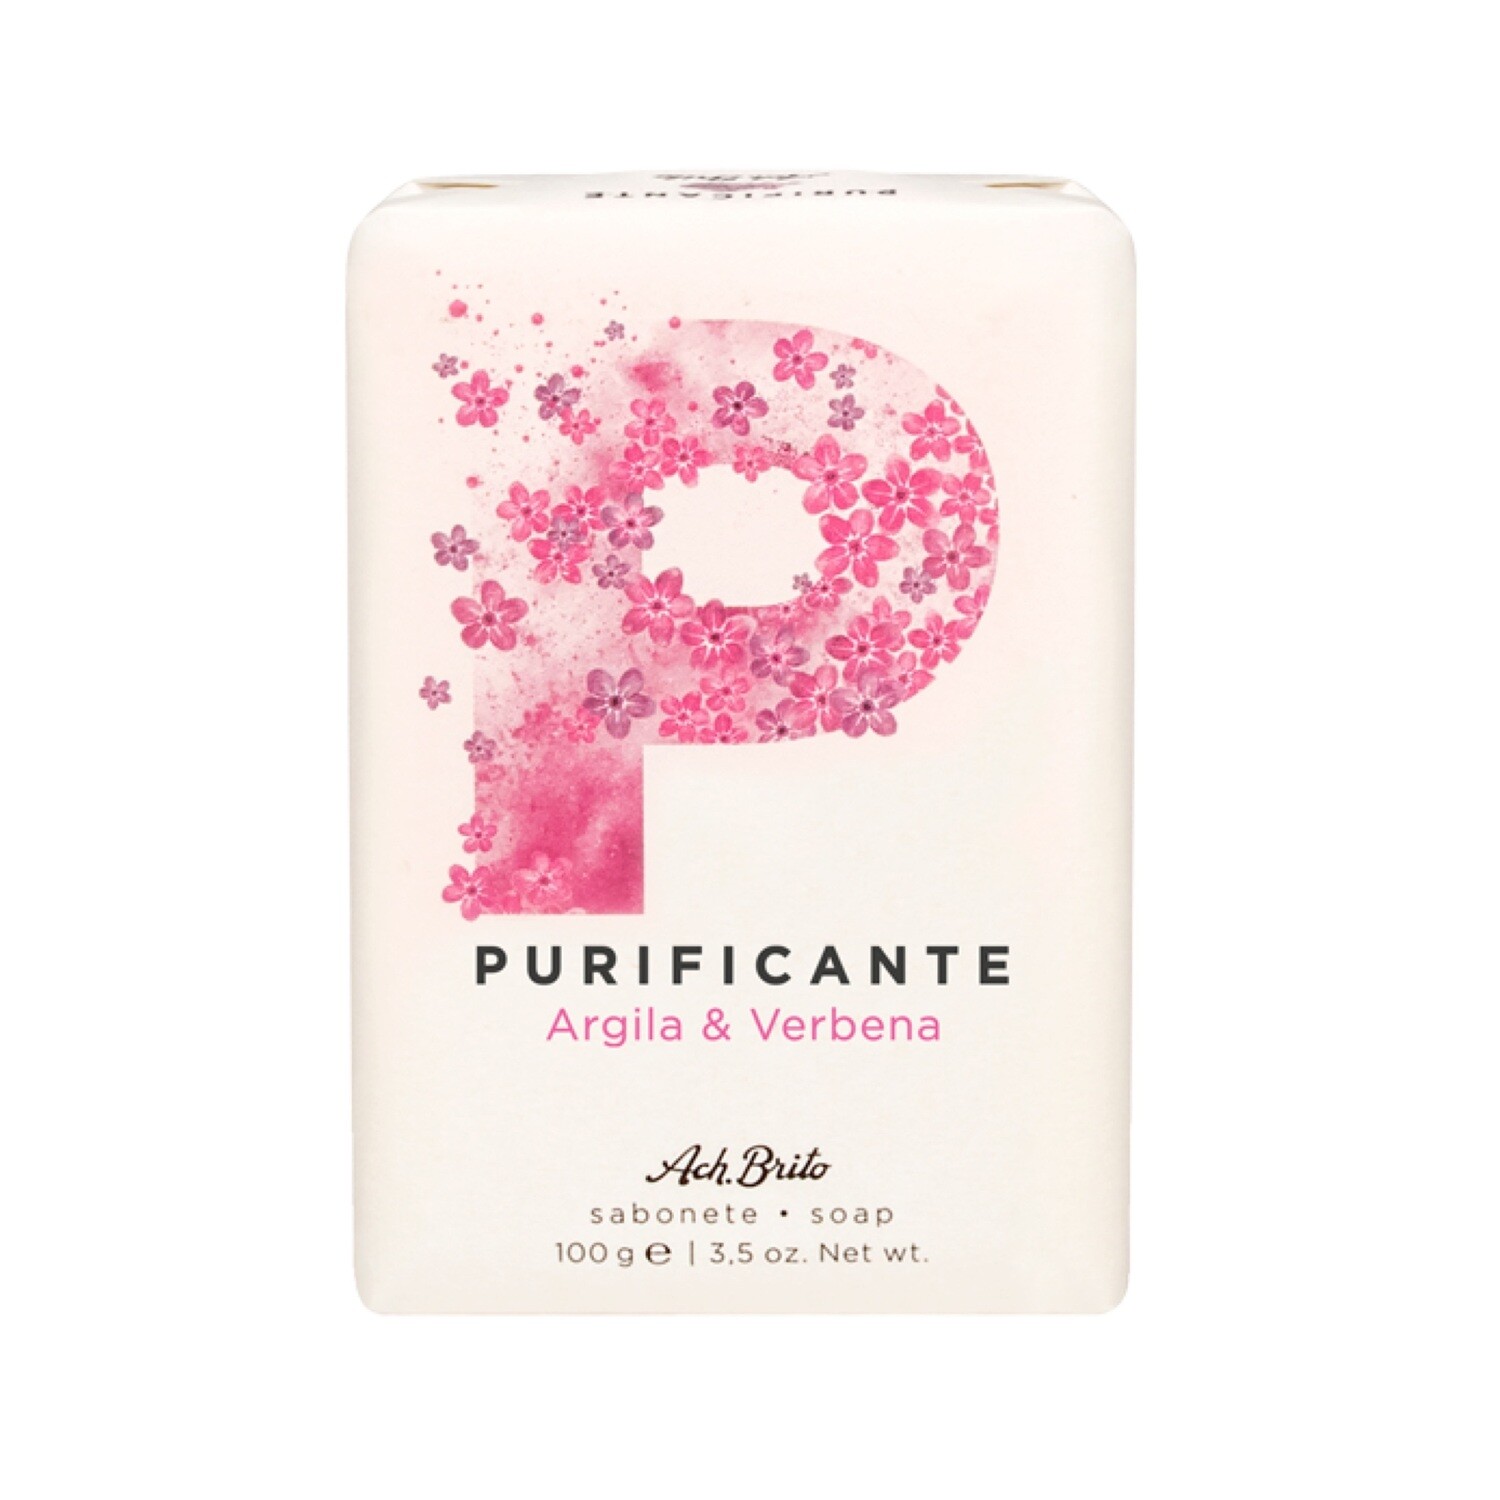 PURIFICANTE (Purifying)